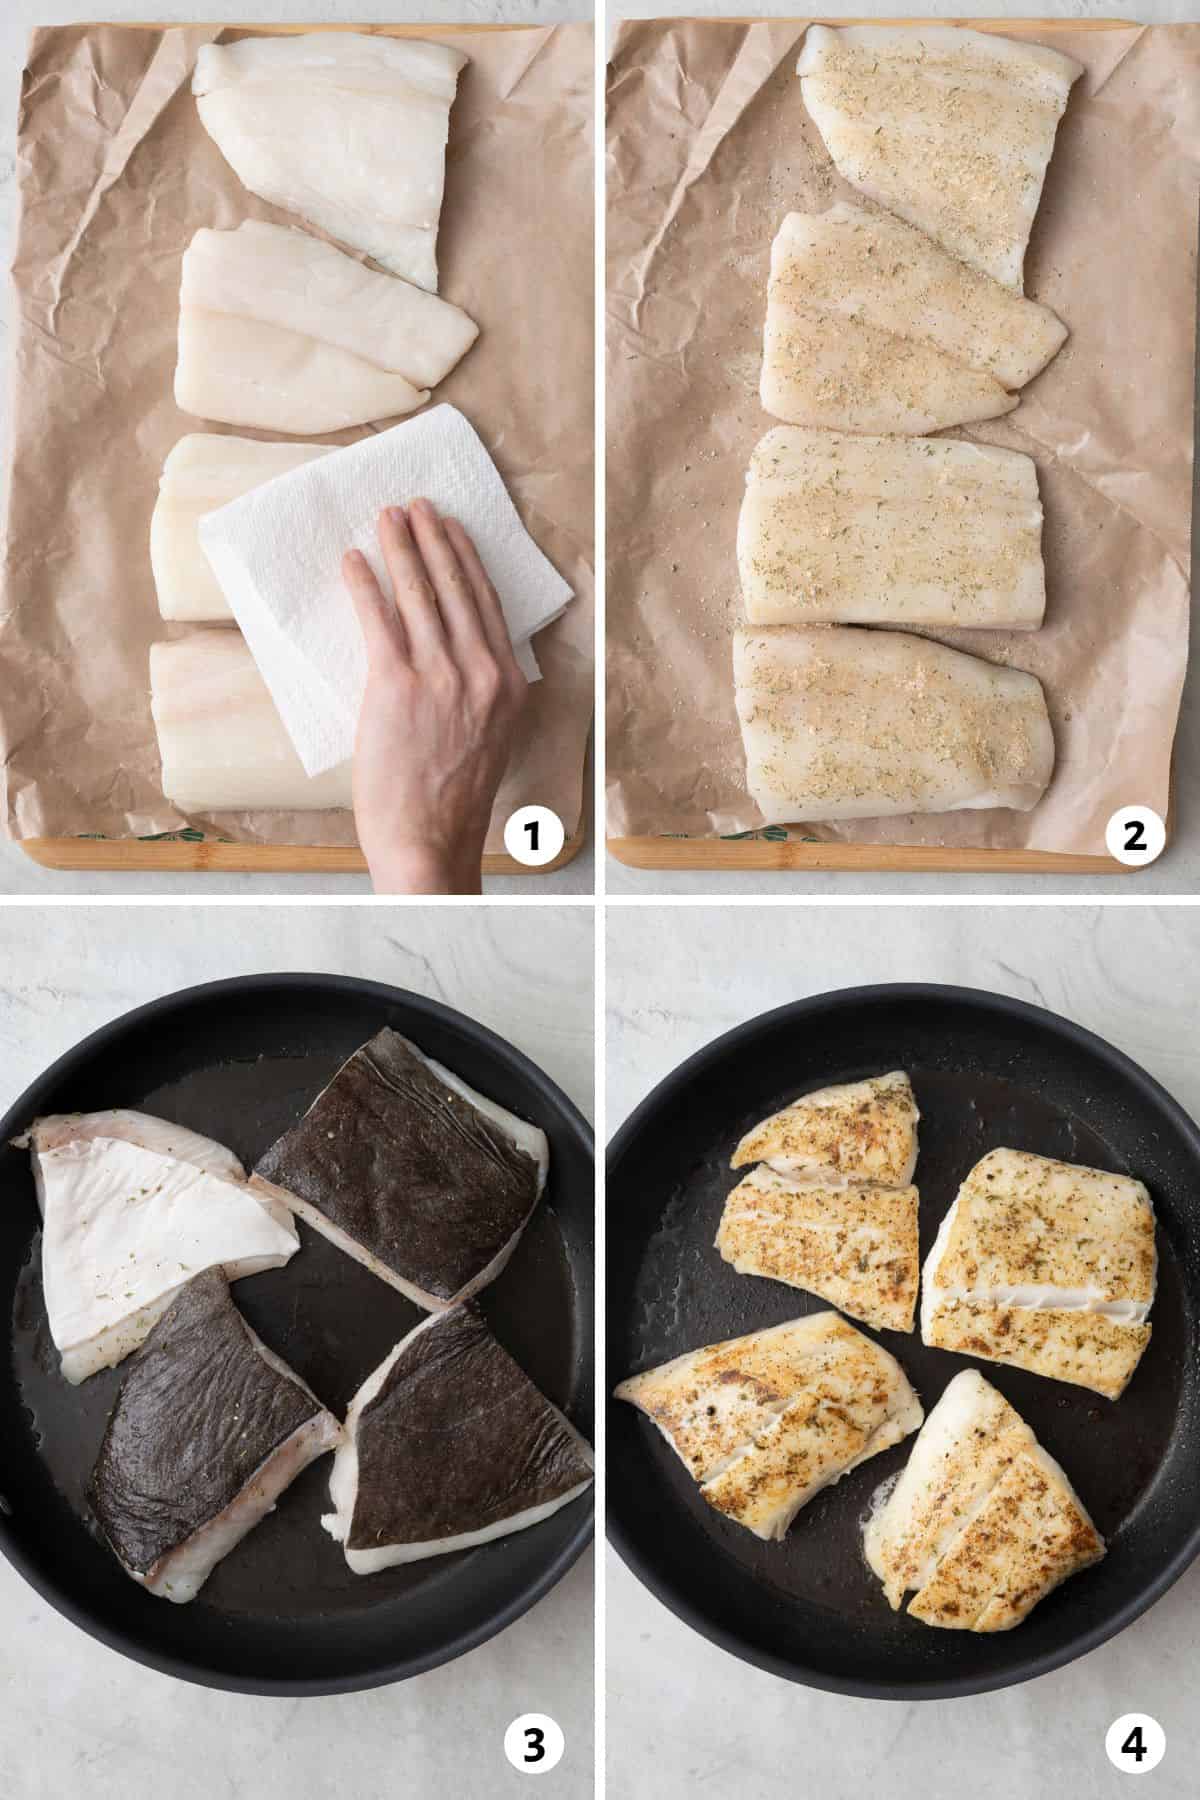 4 image collage making recipe: 1- pat fish dry with paper towel, 2- seasoning added to fillets, 3- fish skin side up in skillet, 4- halibut after flipped on skillet.